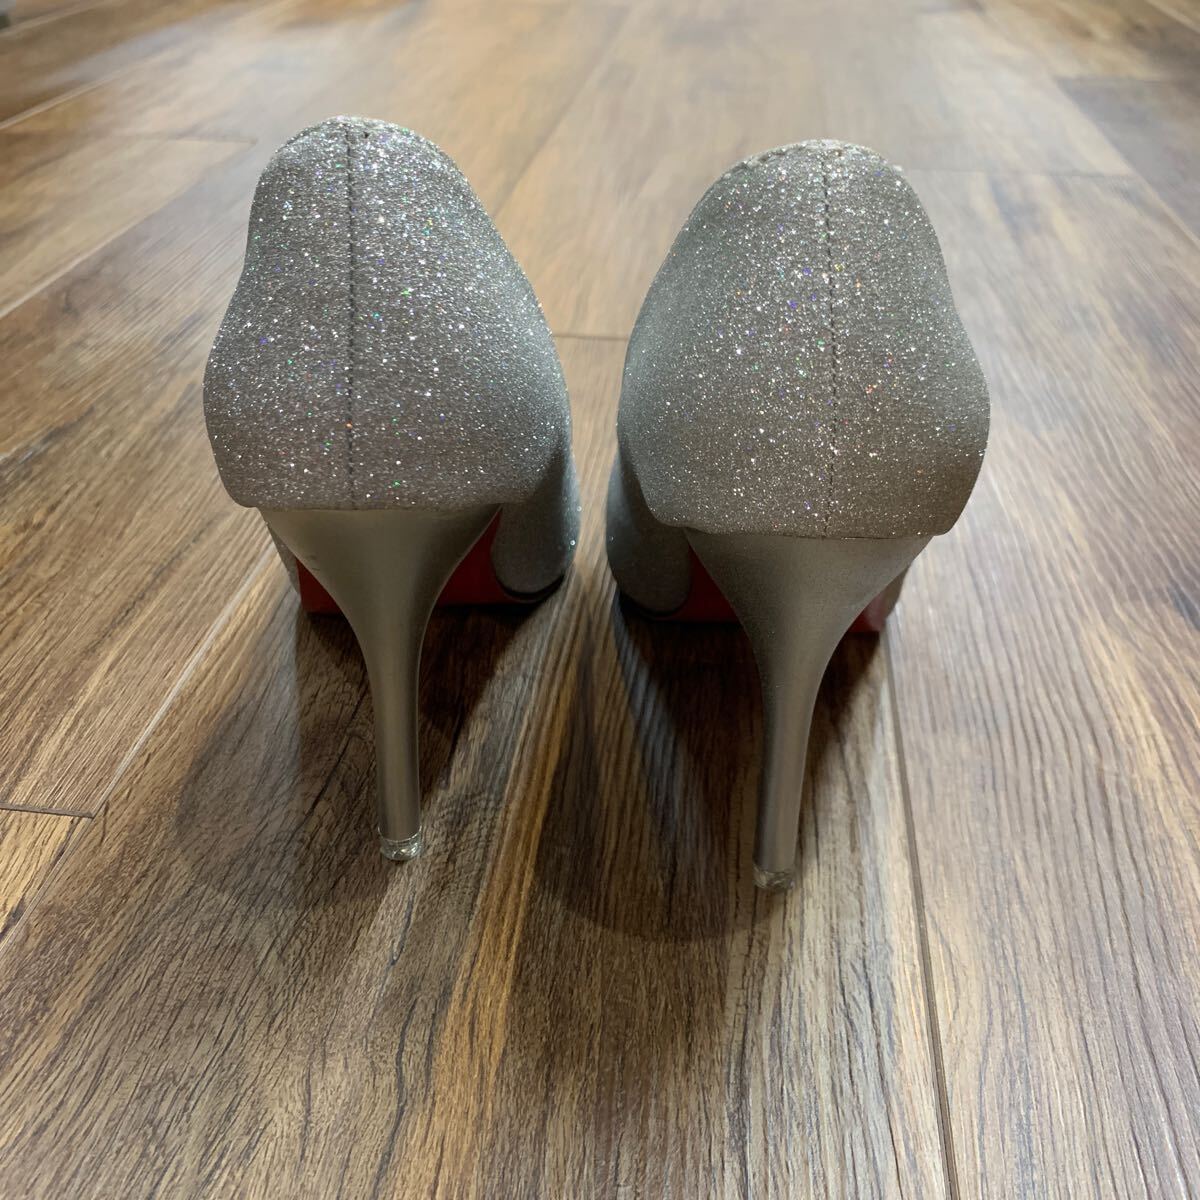  new goods beautiful goods approximately 10cm heel Kirakira lame pumps silver 24cm 24 centimeter 10 centimeter silver color high heel pin heel red sole lady's shoes 